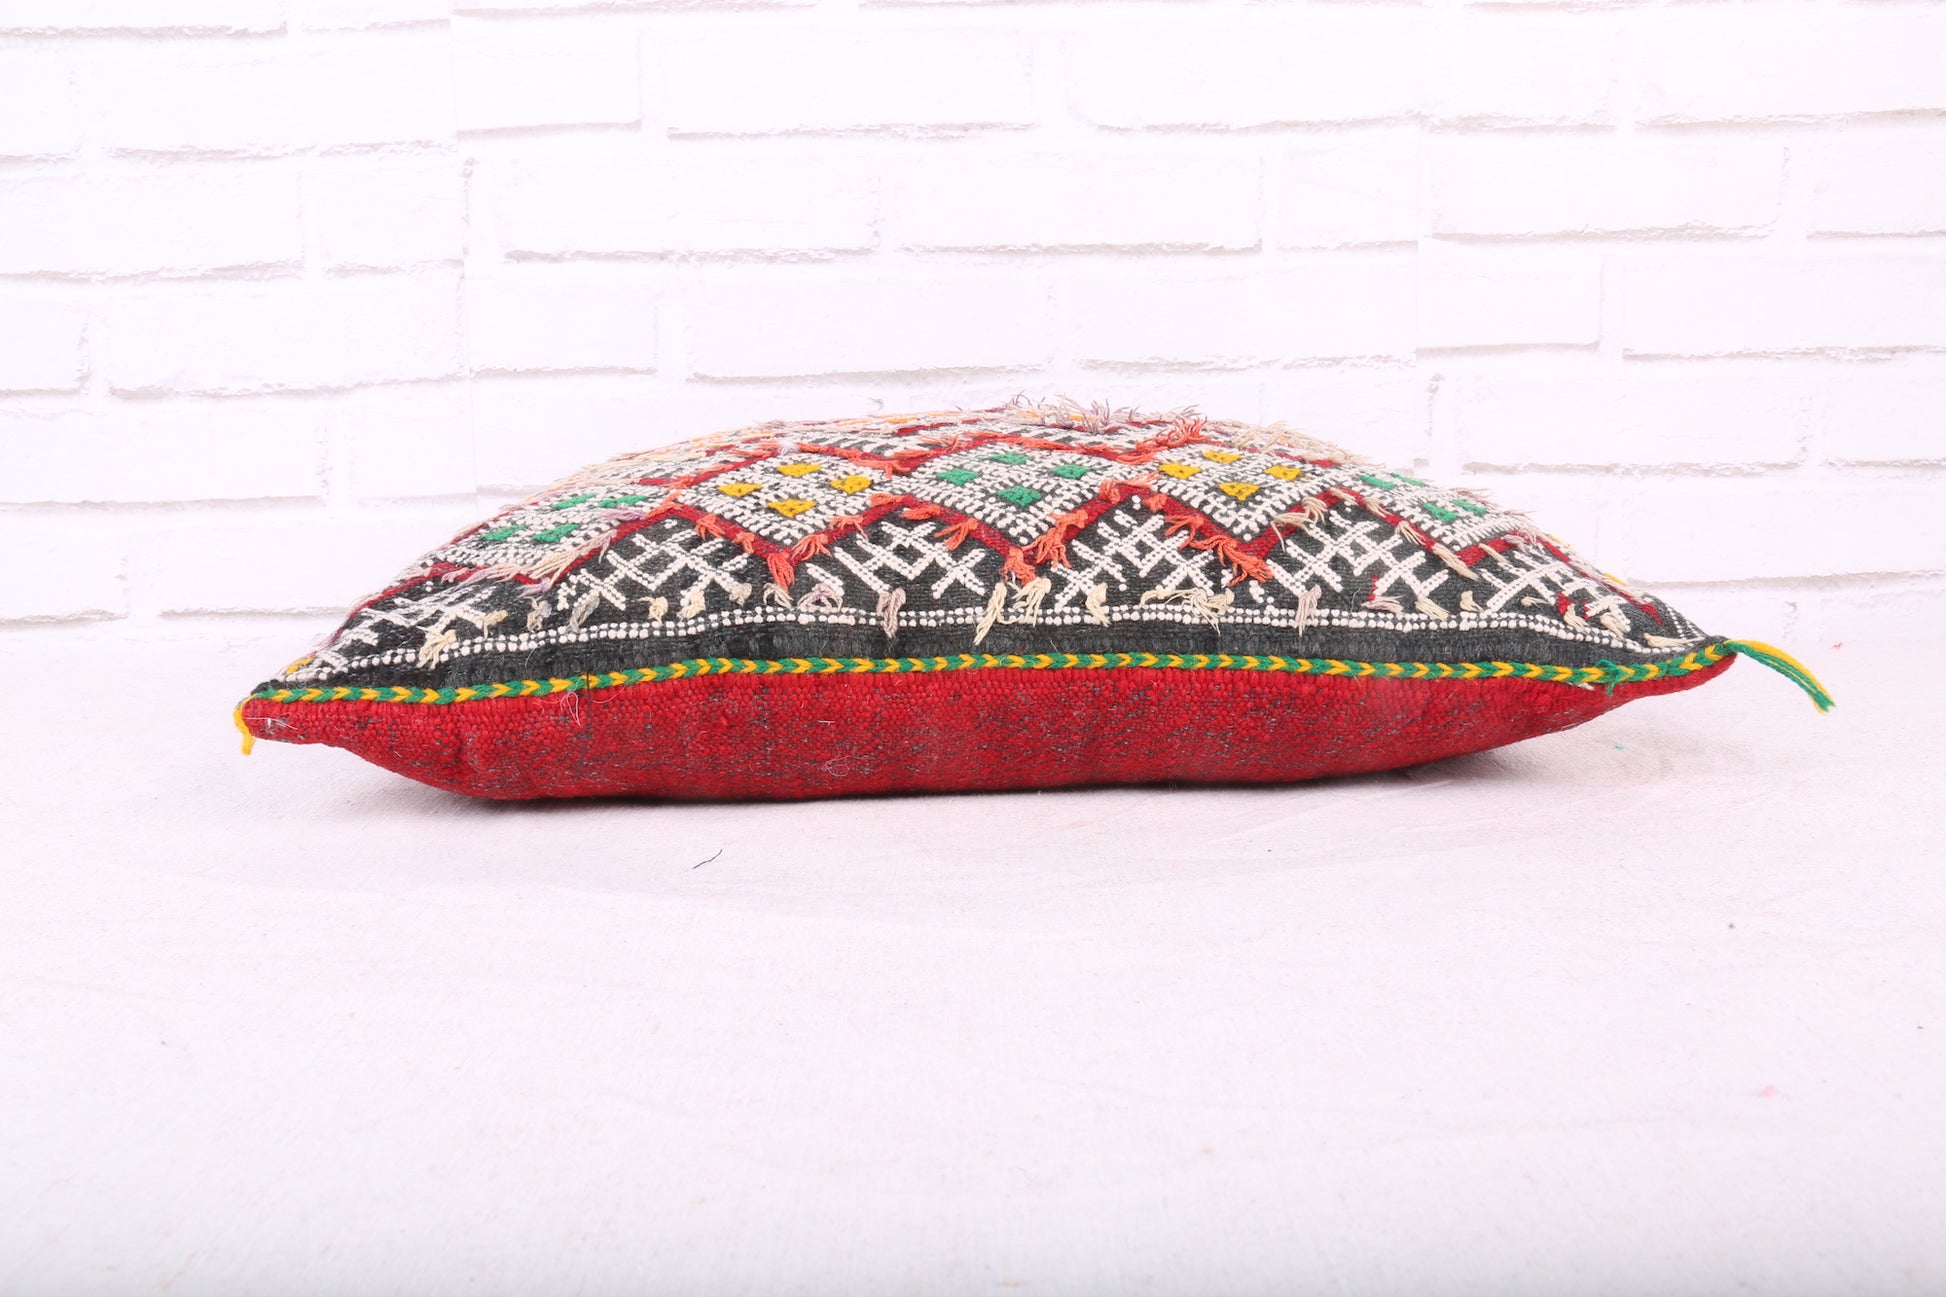 Stunning Square Moroccan Pillow 15.3 inches X 19.6 inches